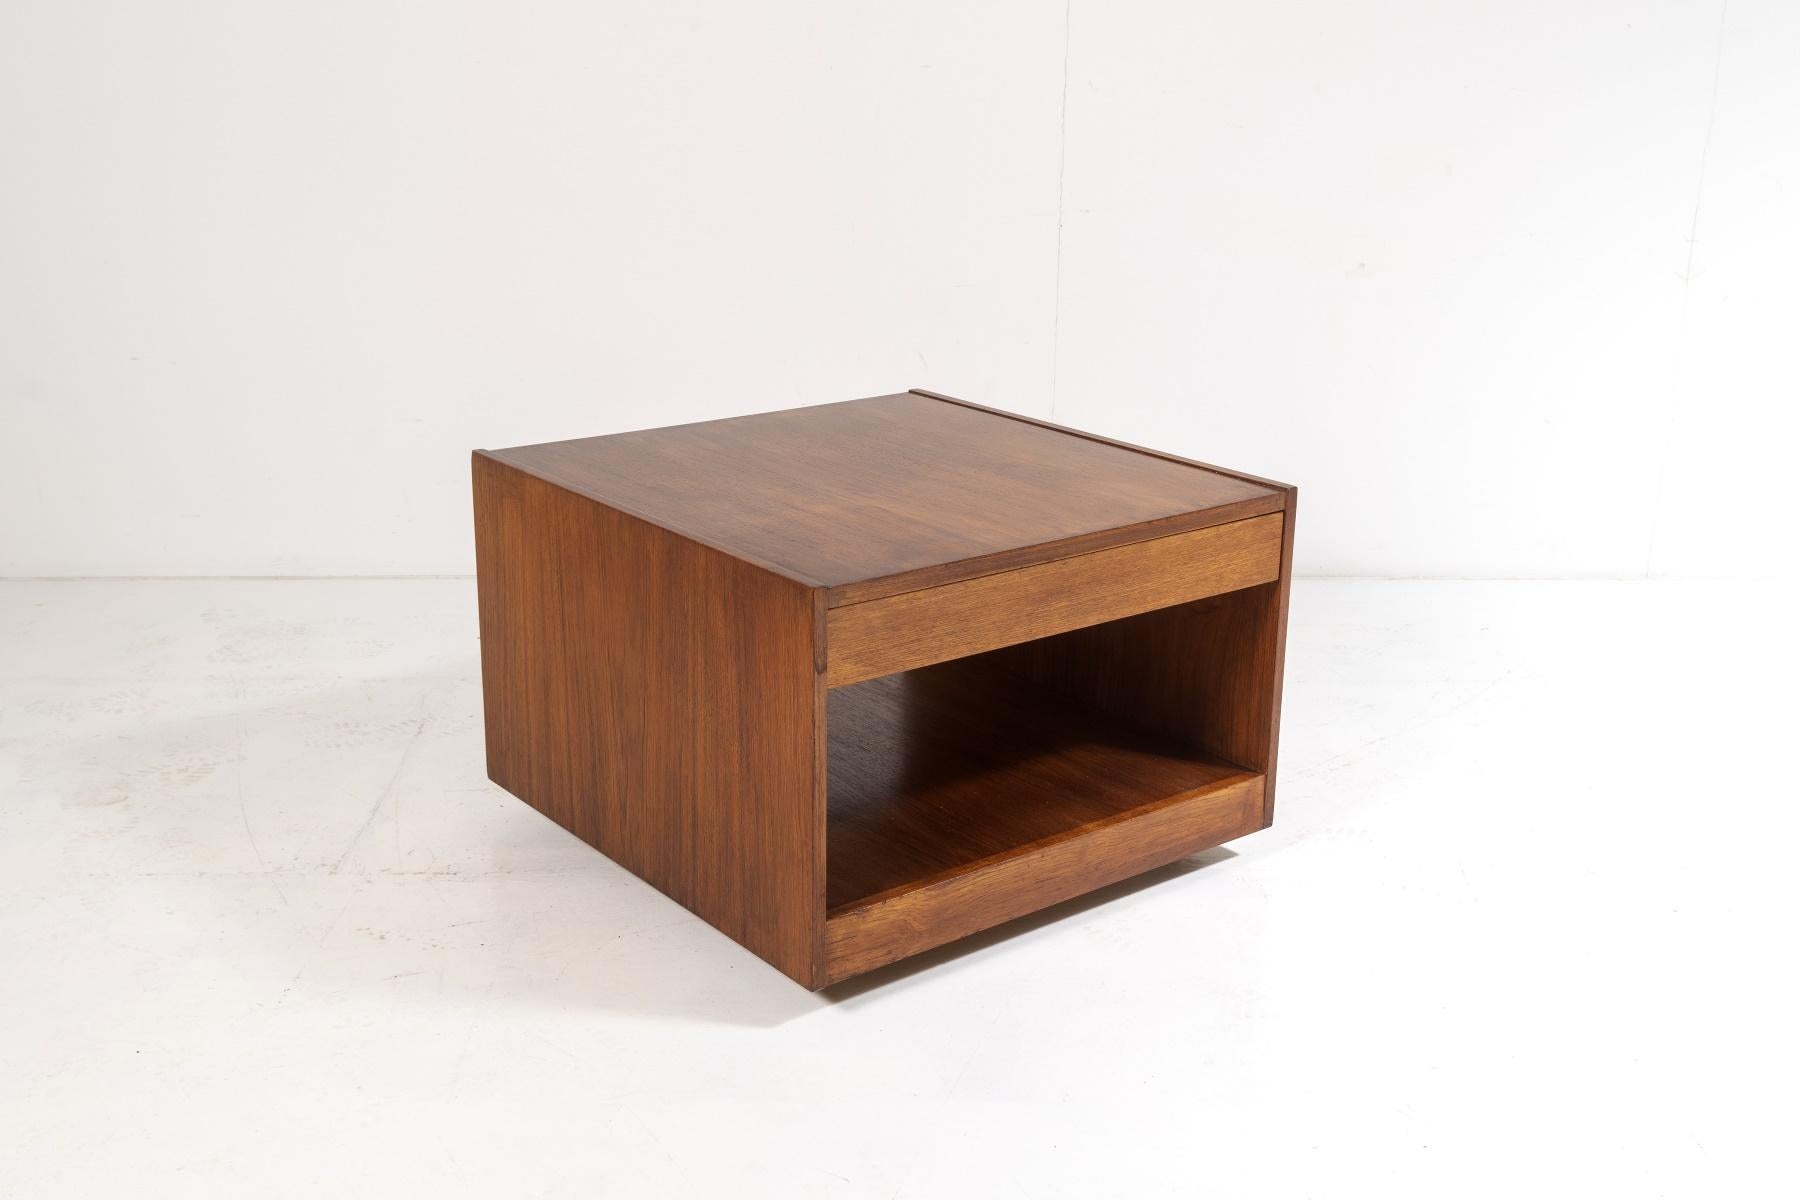 A very good quality mid century teak coffee table or sofa side table in excellent condition.
The square cube shape is a staple of mid century design and this classic piece is a superb example.  A practical item with plenty of space on the lower